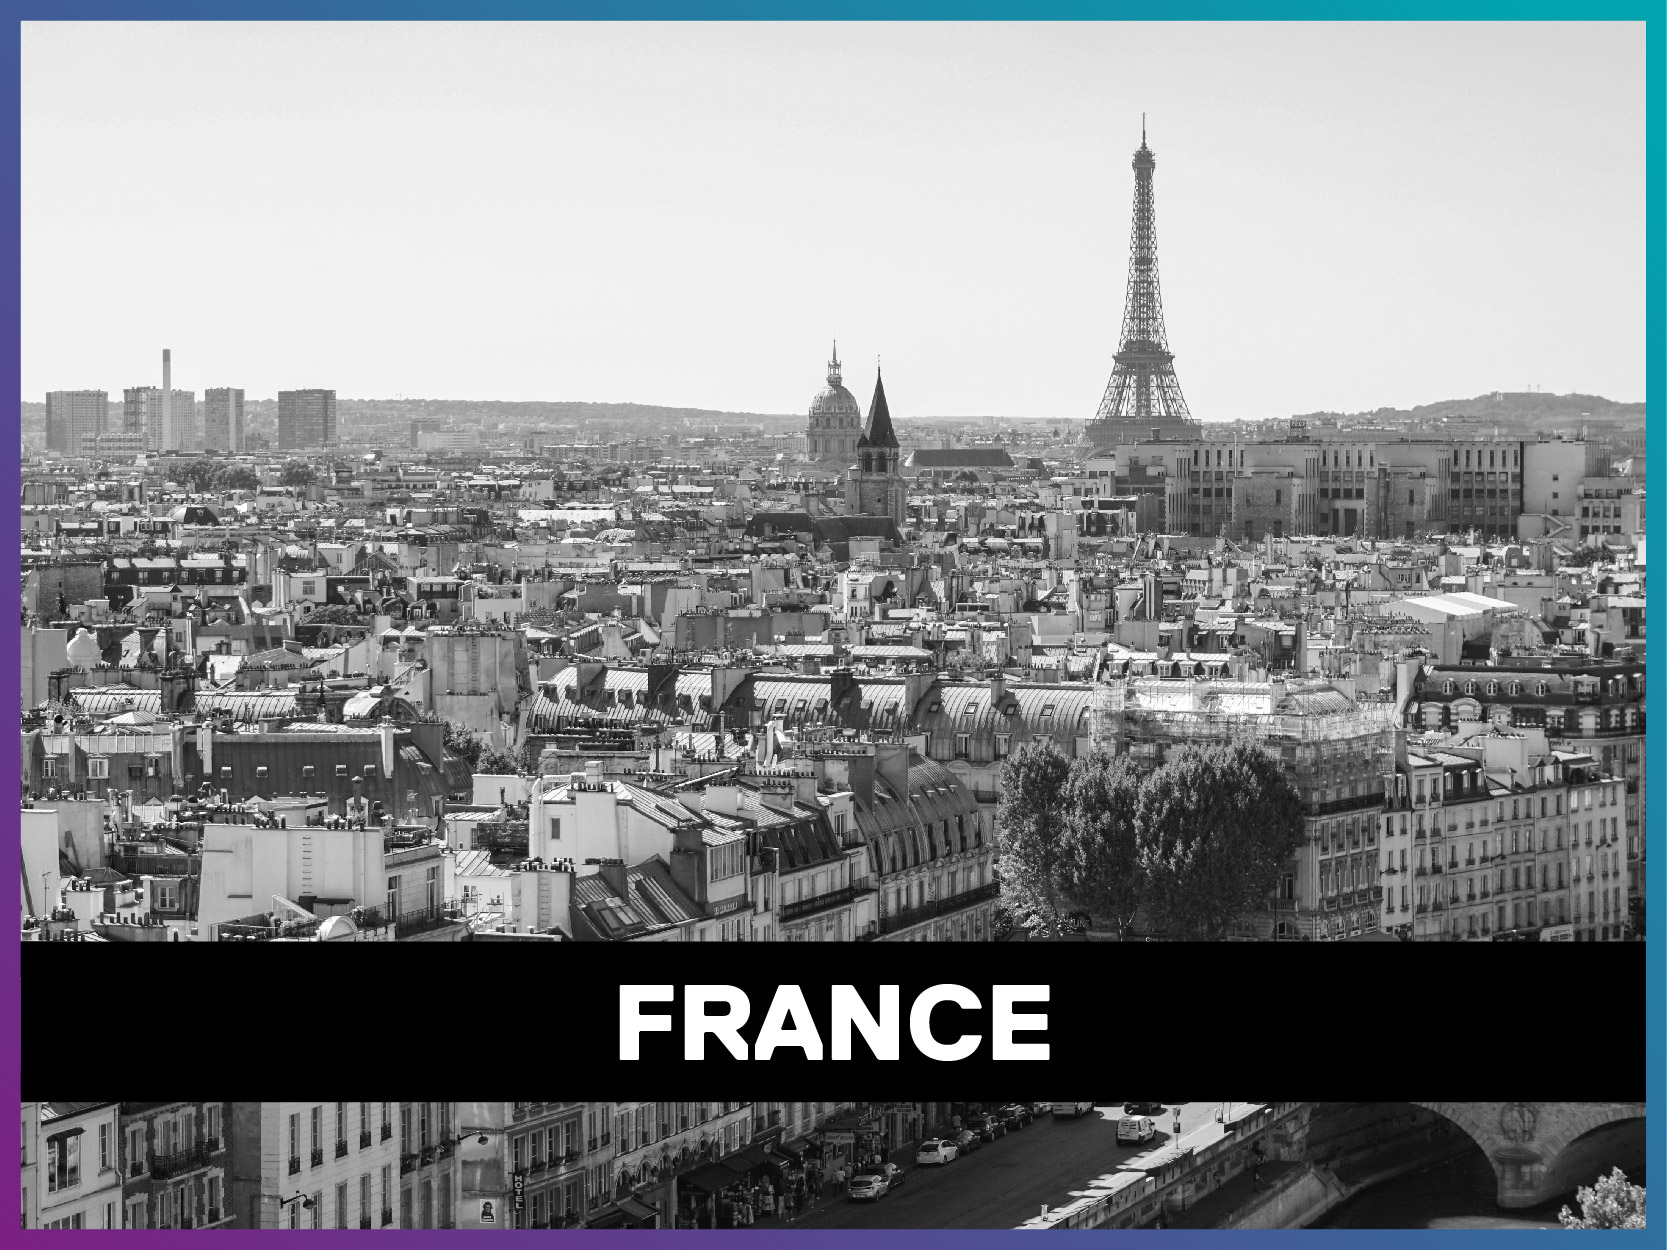 France is written on a banner on top of a picture of the country with the Eiffel tower in the background